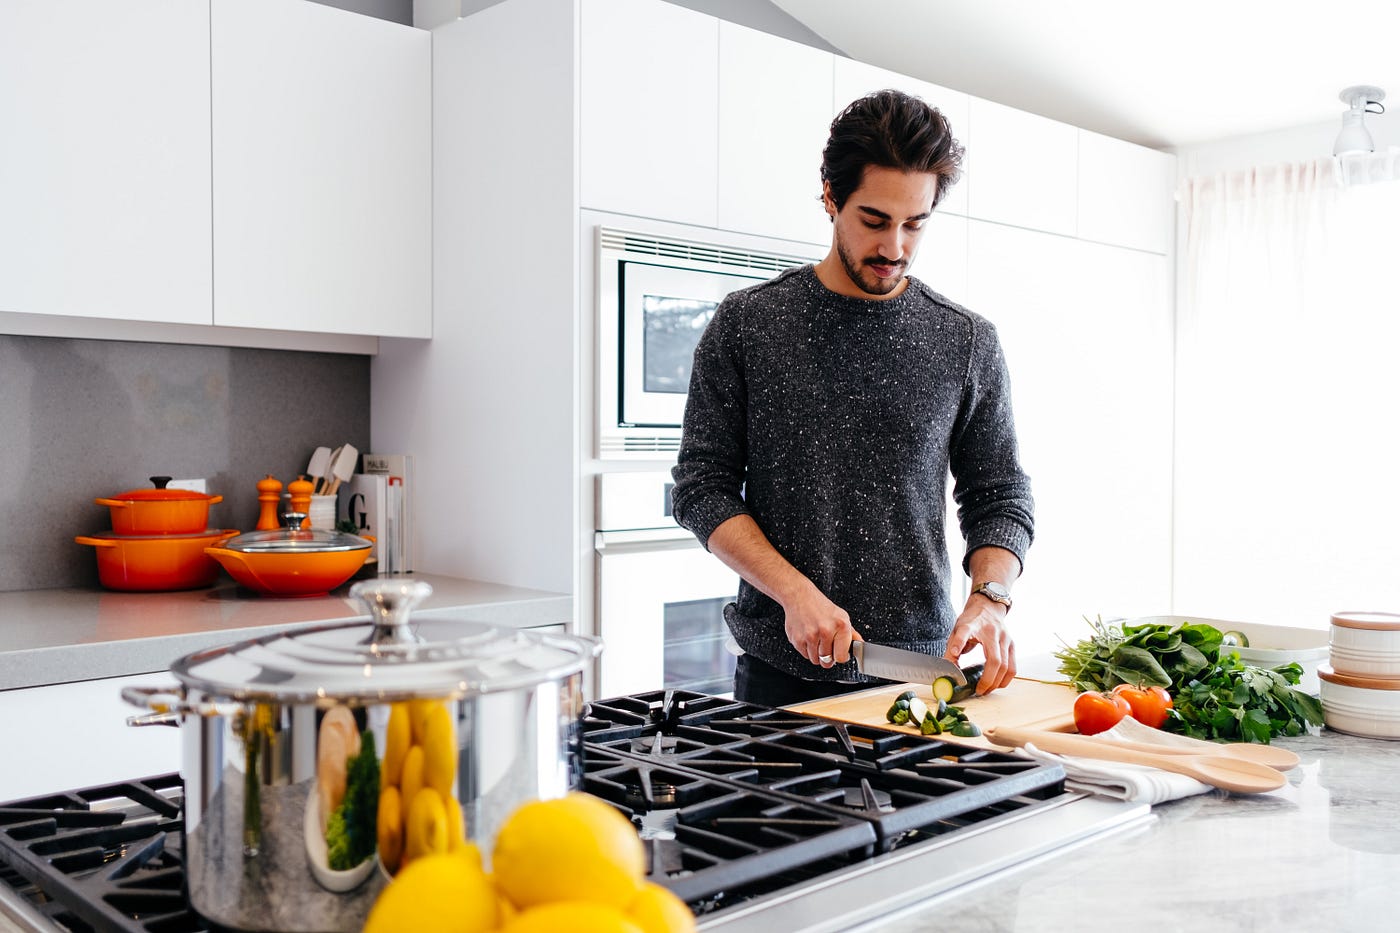 Cooking Might Be The Most Important Life Skill, by Jordan Mendiola, Long-Term Perspective